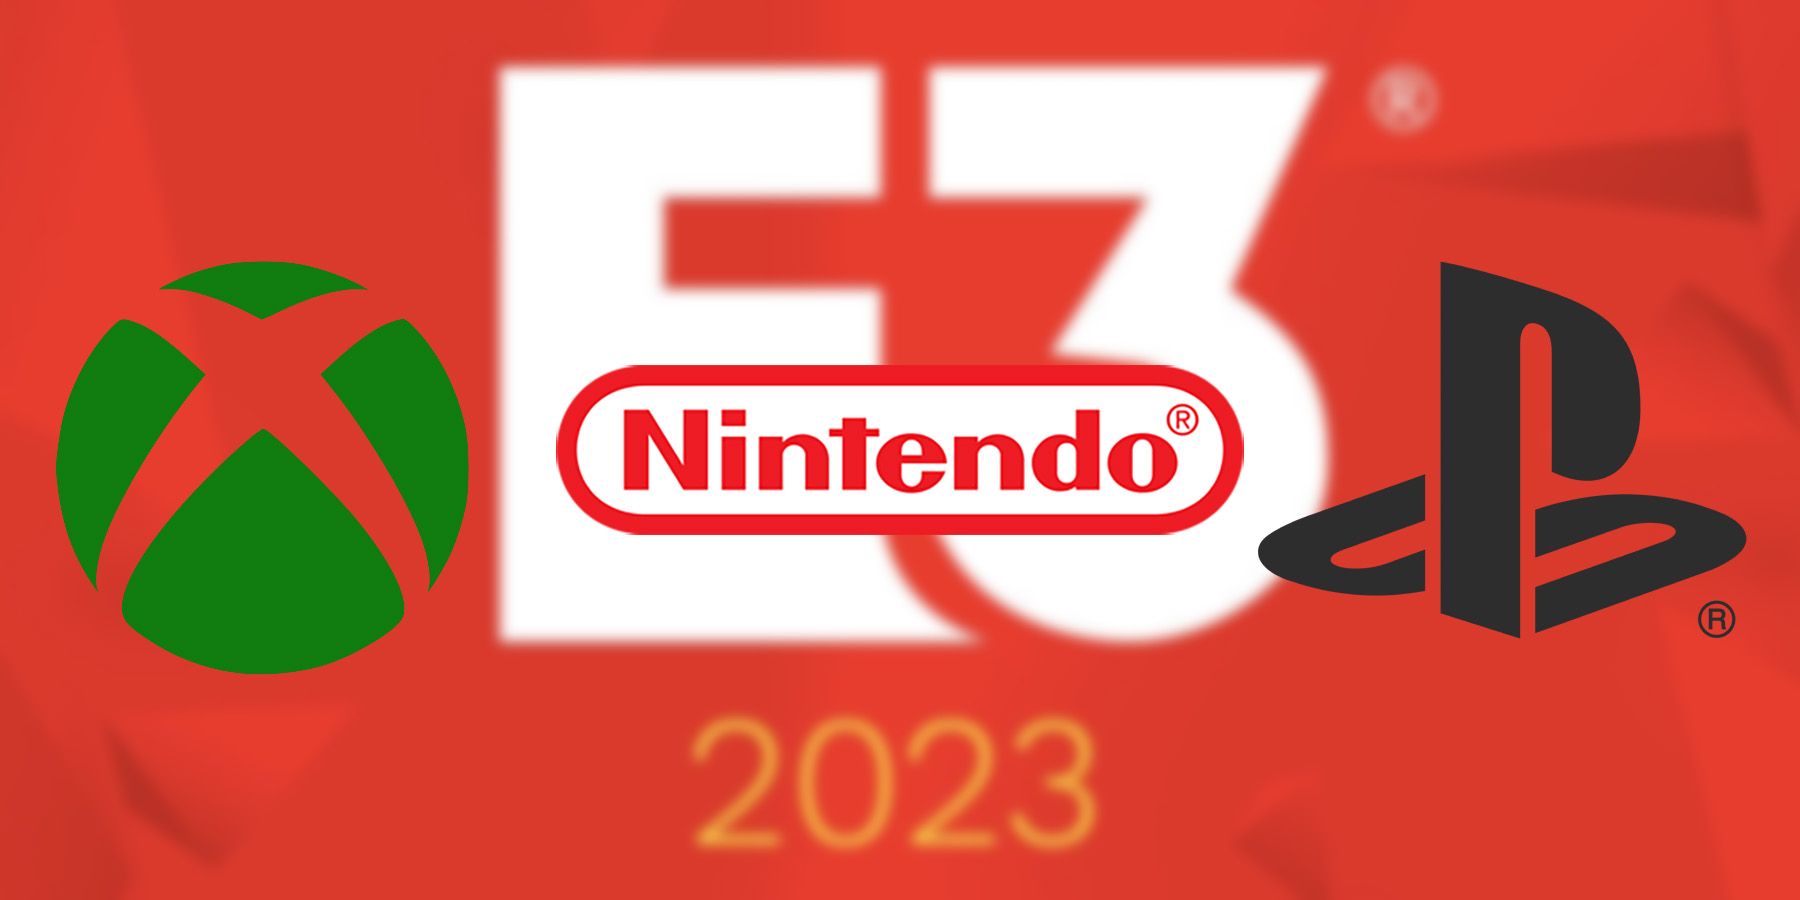 Nintendo, PlayStation, and Xbox Skipping E3 2023, Claims Report